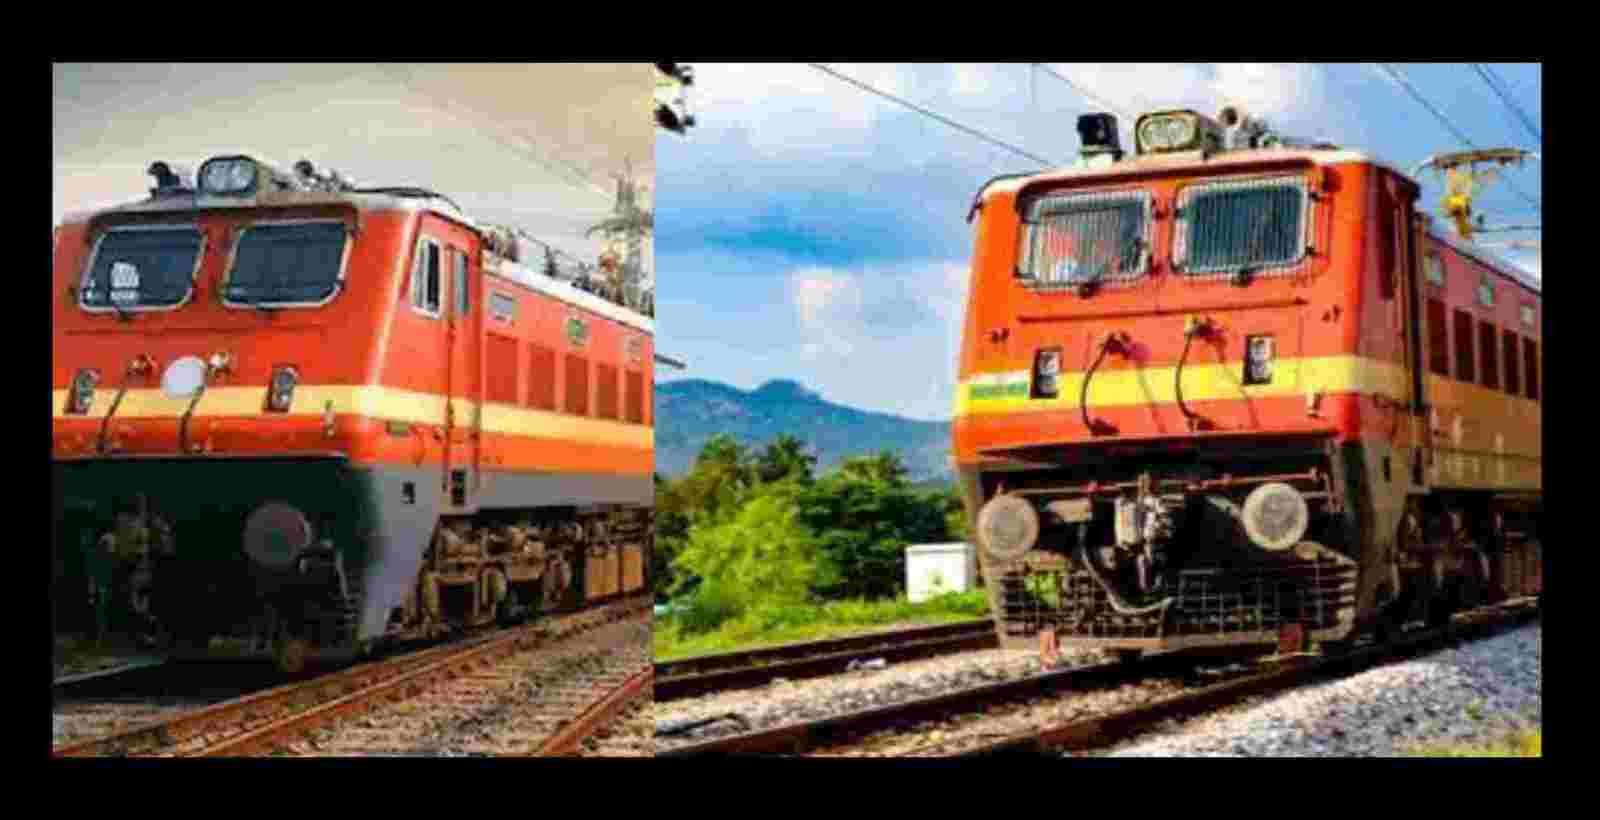 Uttarakhand news: Special Kanwar Express is going to run from Delhi to Haridwar. Check the time table